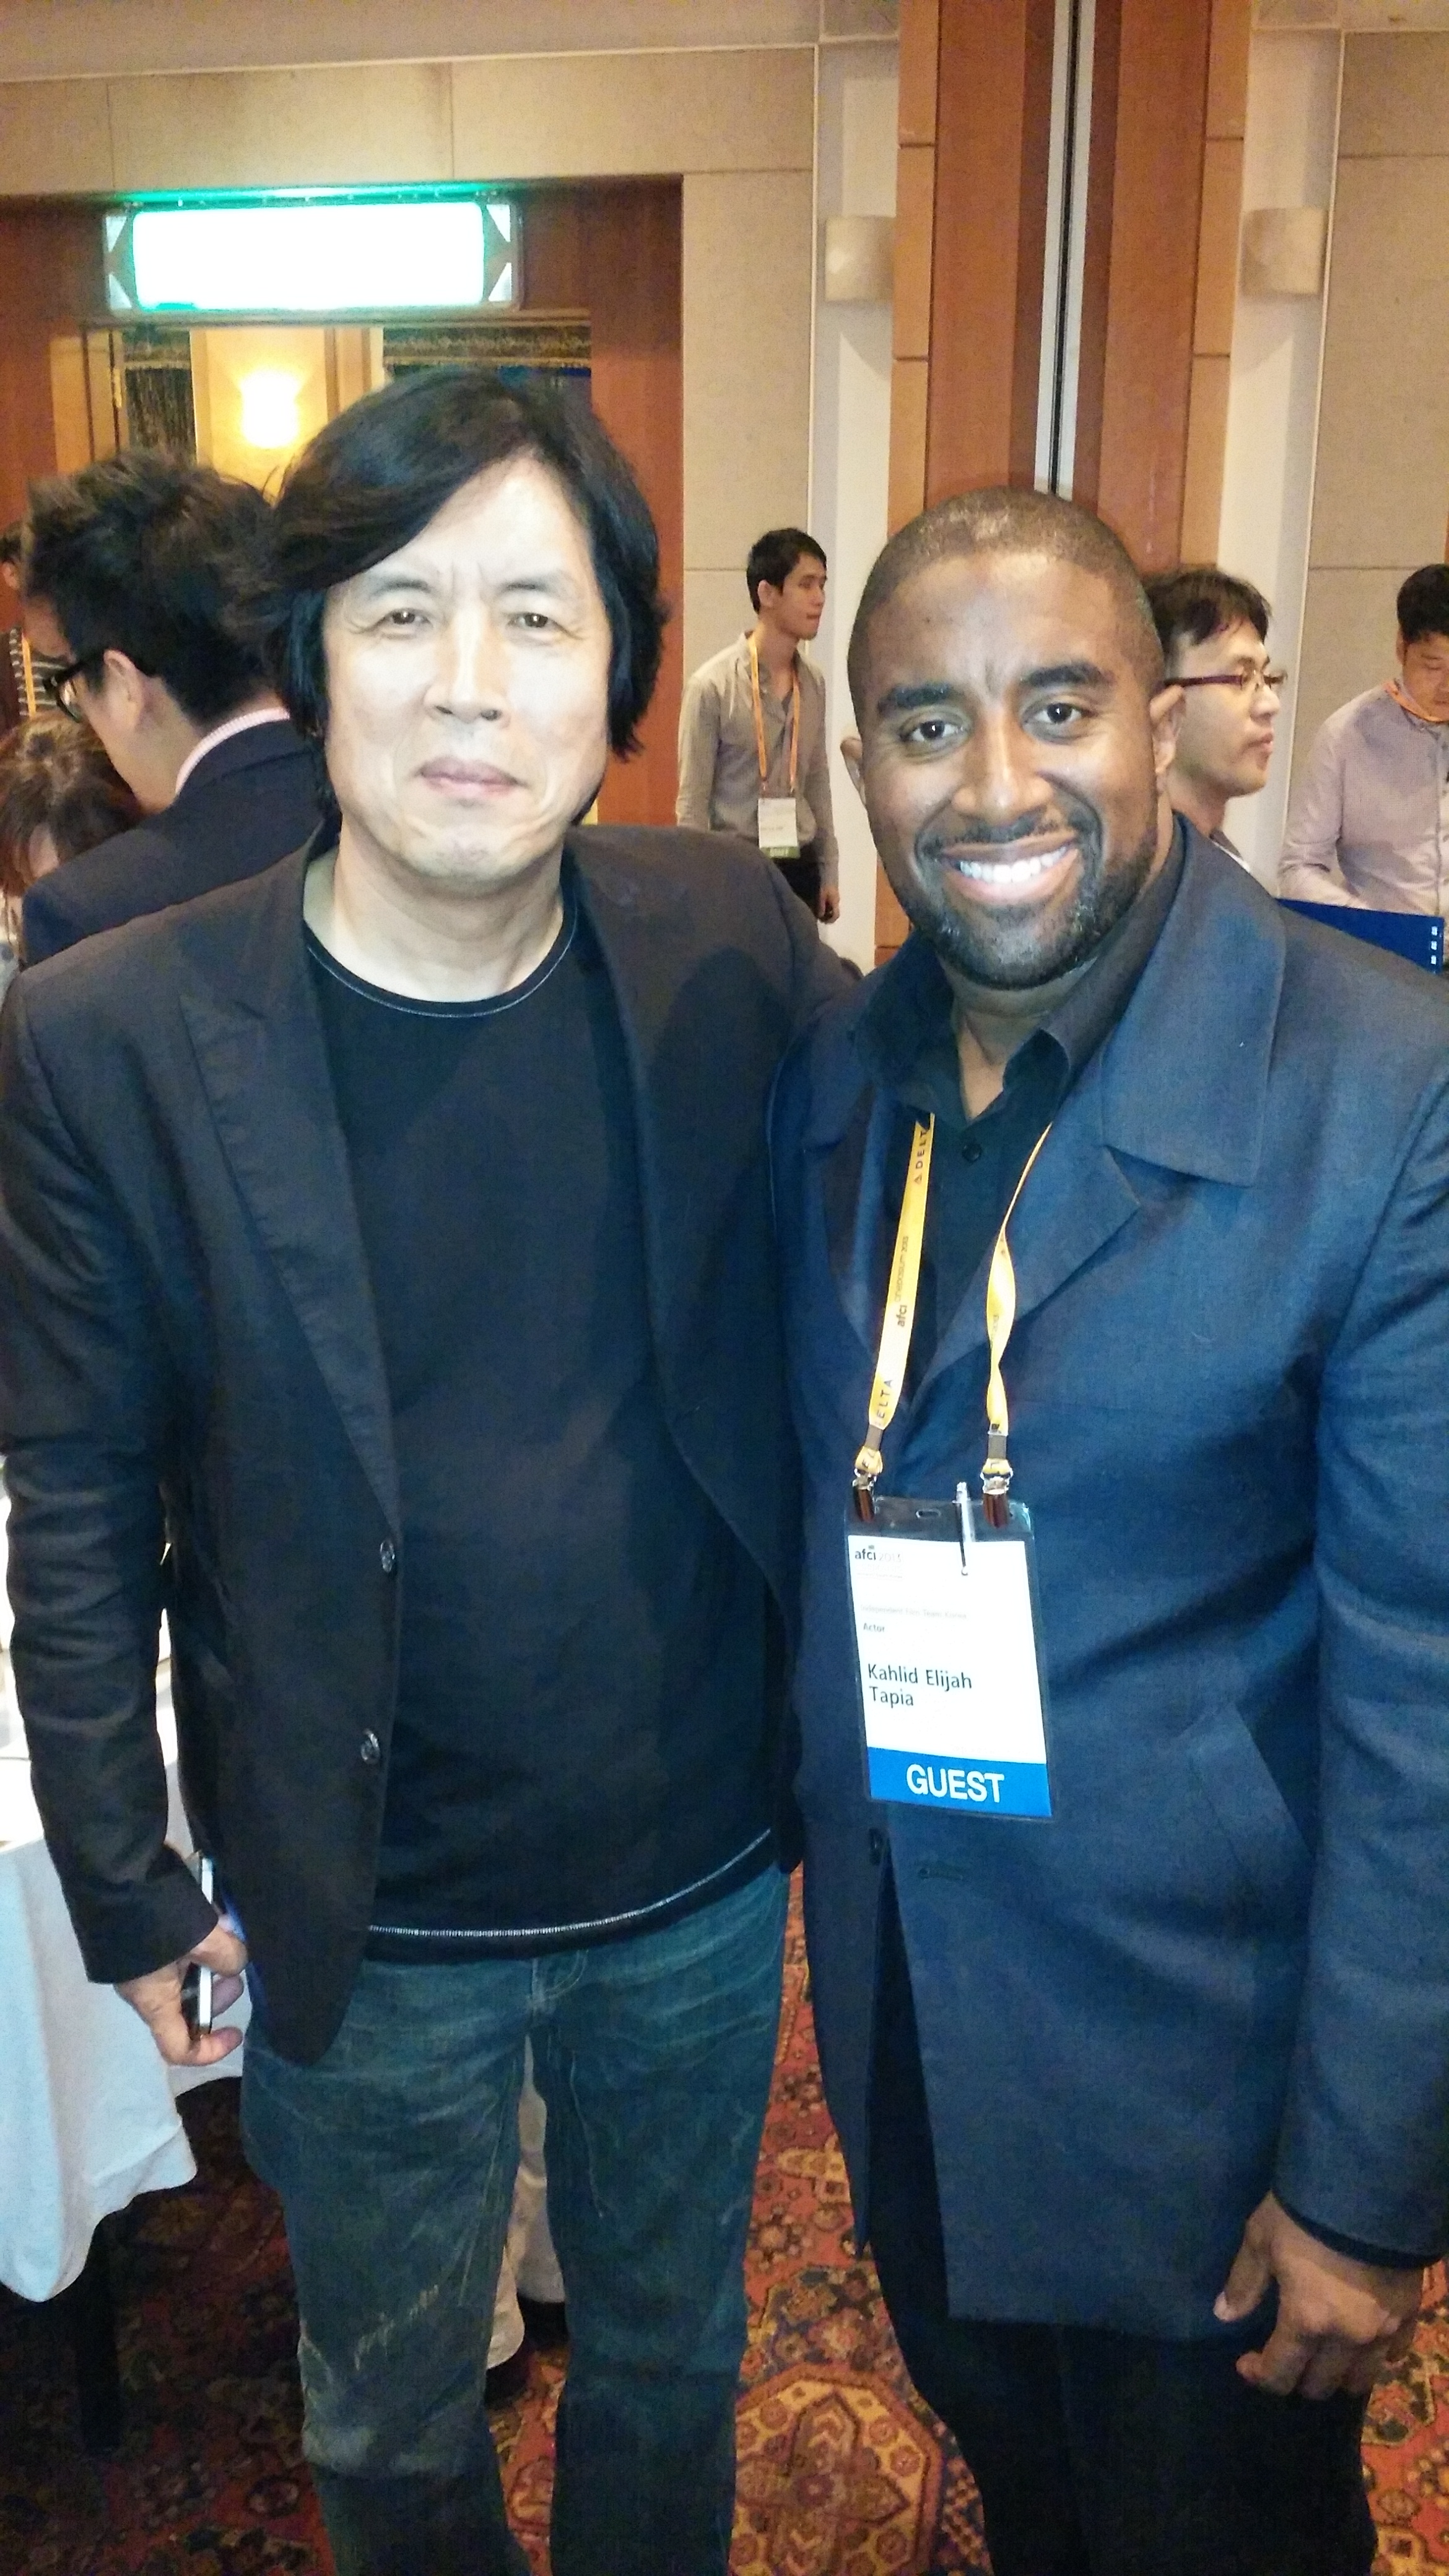 Lee Chang-Dong and Kahlid Elijah Tapia at the annual AFCI Cineposium in Jecheon City, Korea